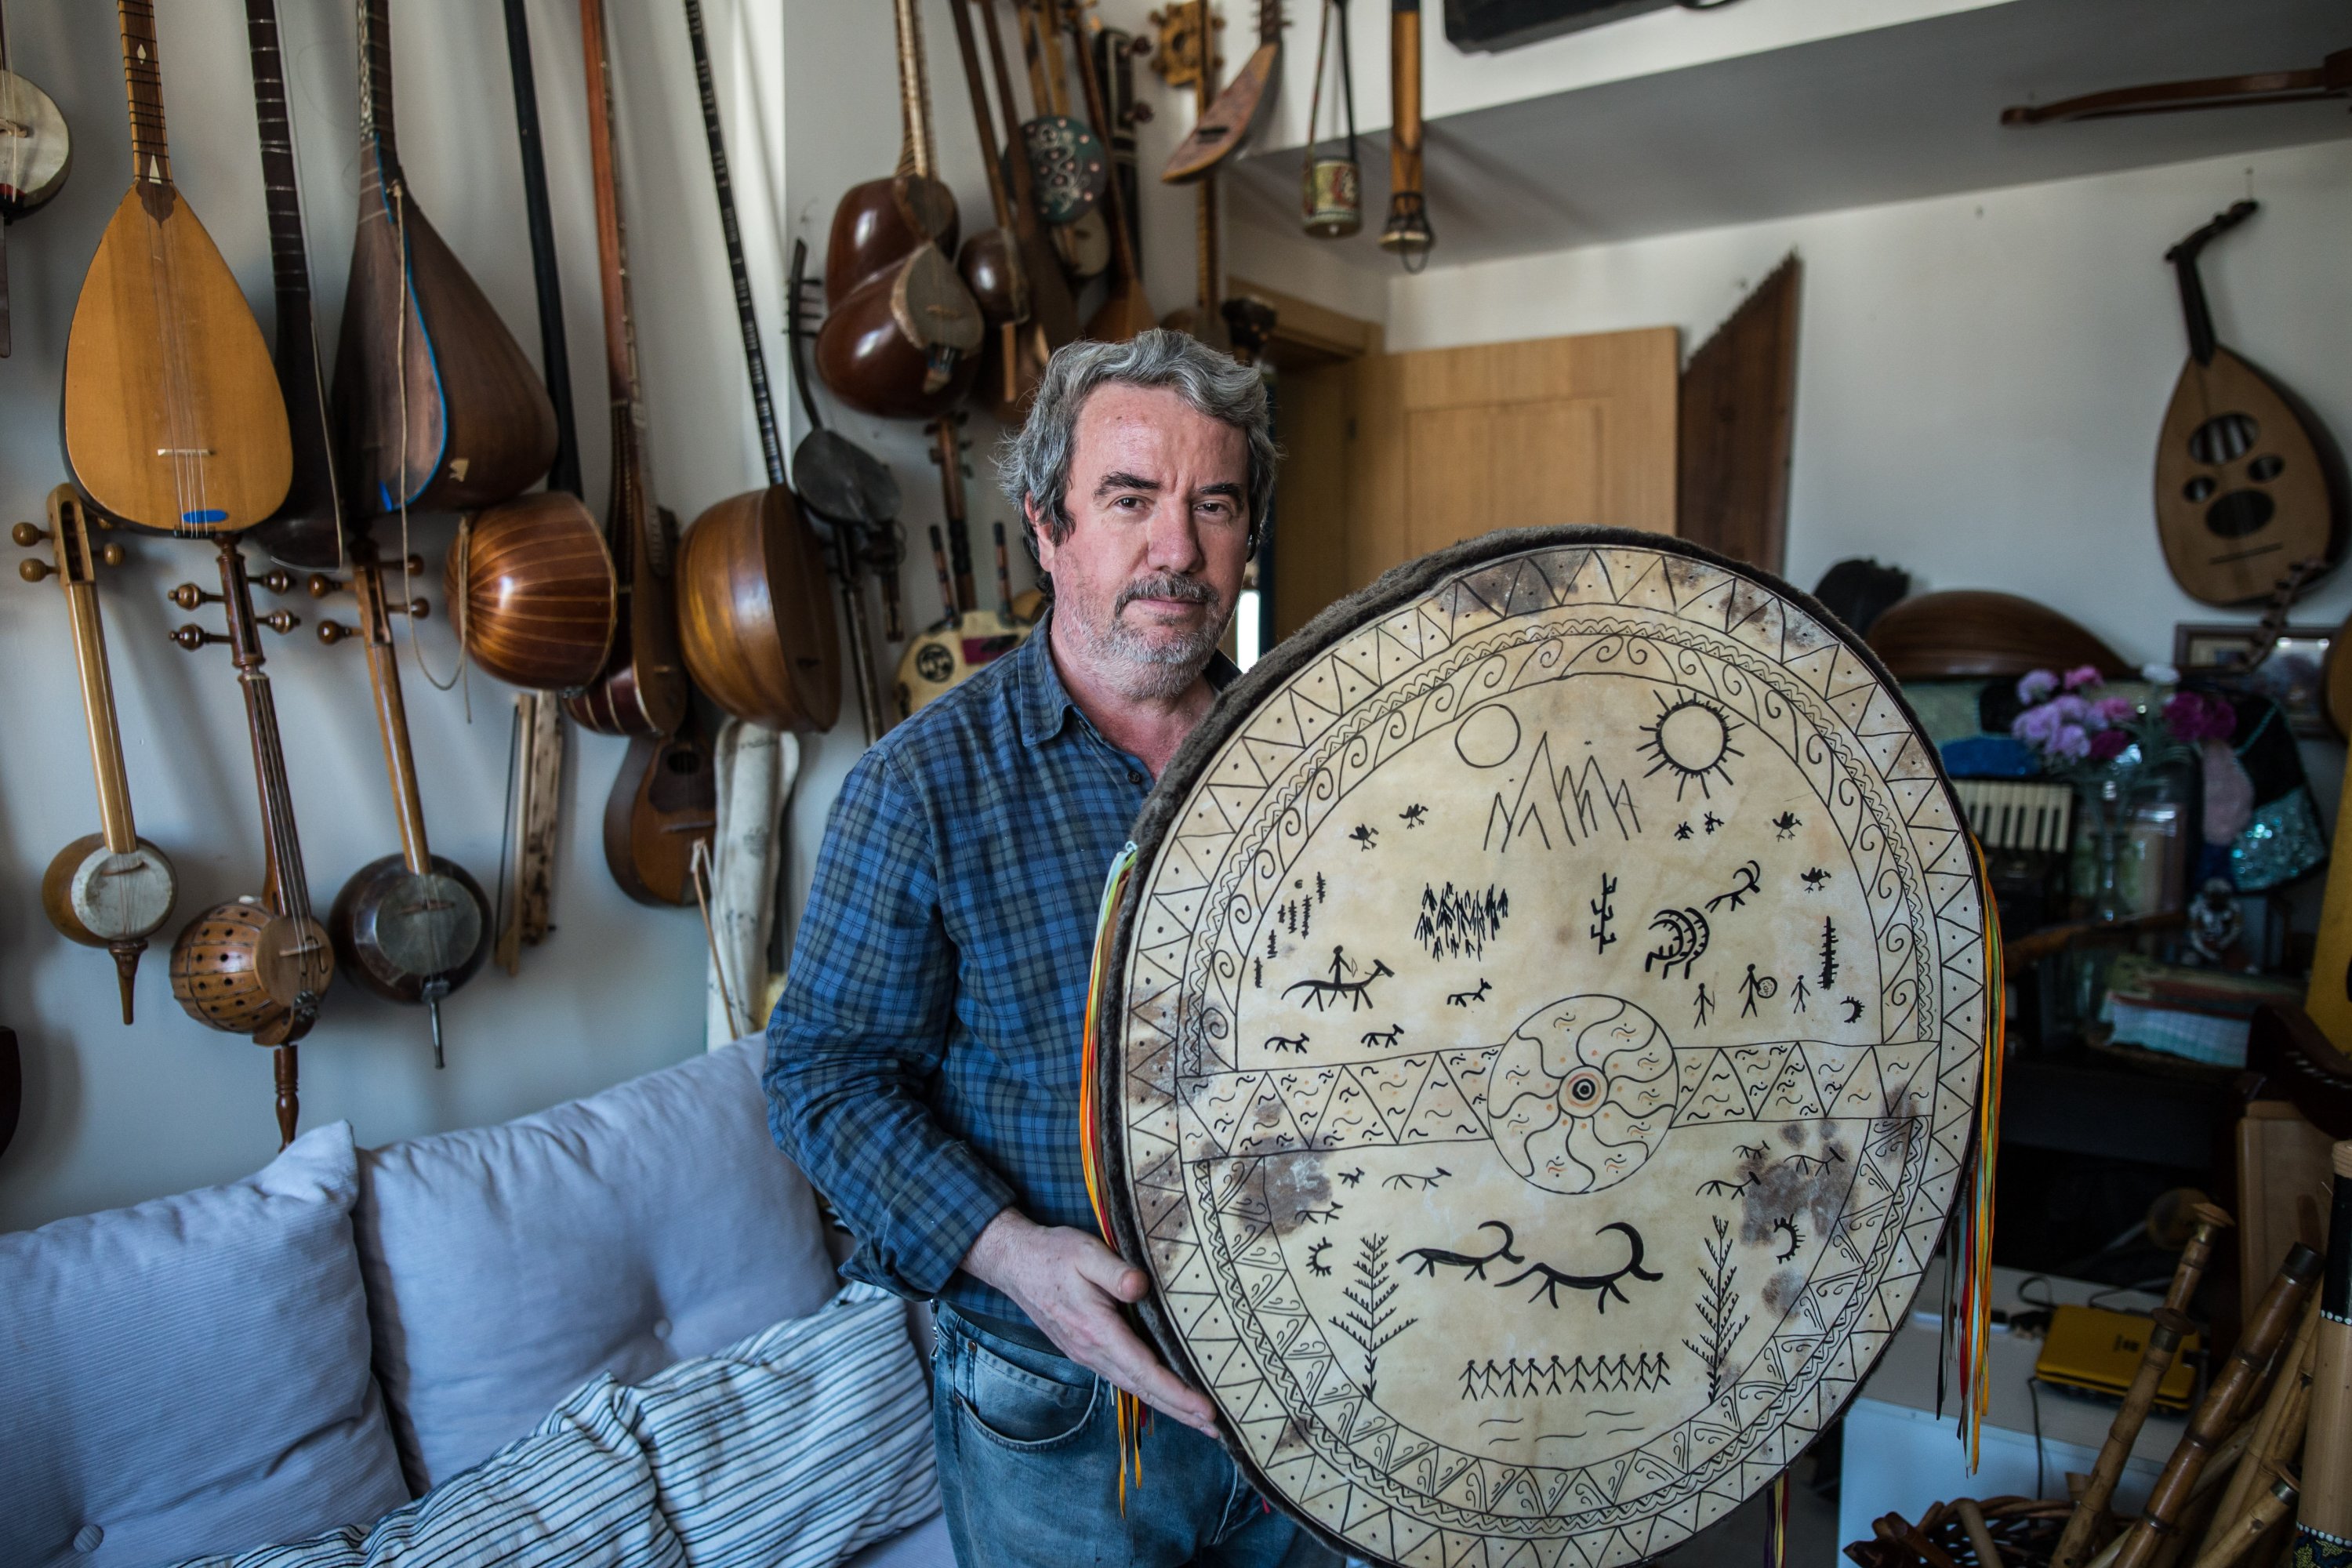 Feridun Obul poses with a Shaman drum that he made in his workshop in Sultanahmet Square, Istanbul, Turkey, Jan. 17, 2019. (PHOTO BY MURAT ŞENGÜL)